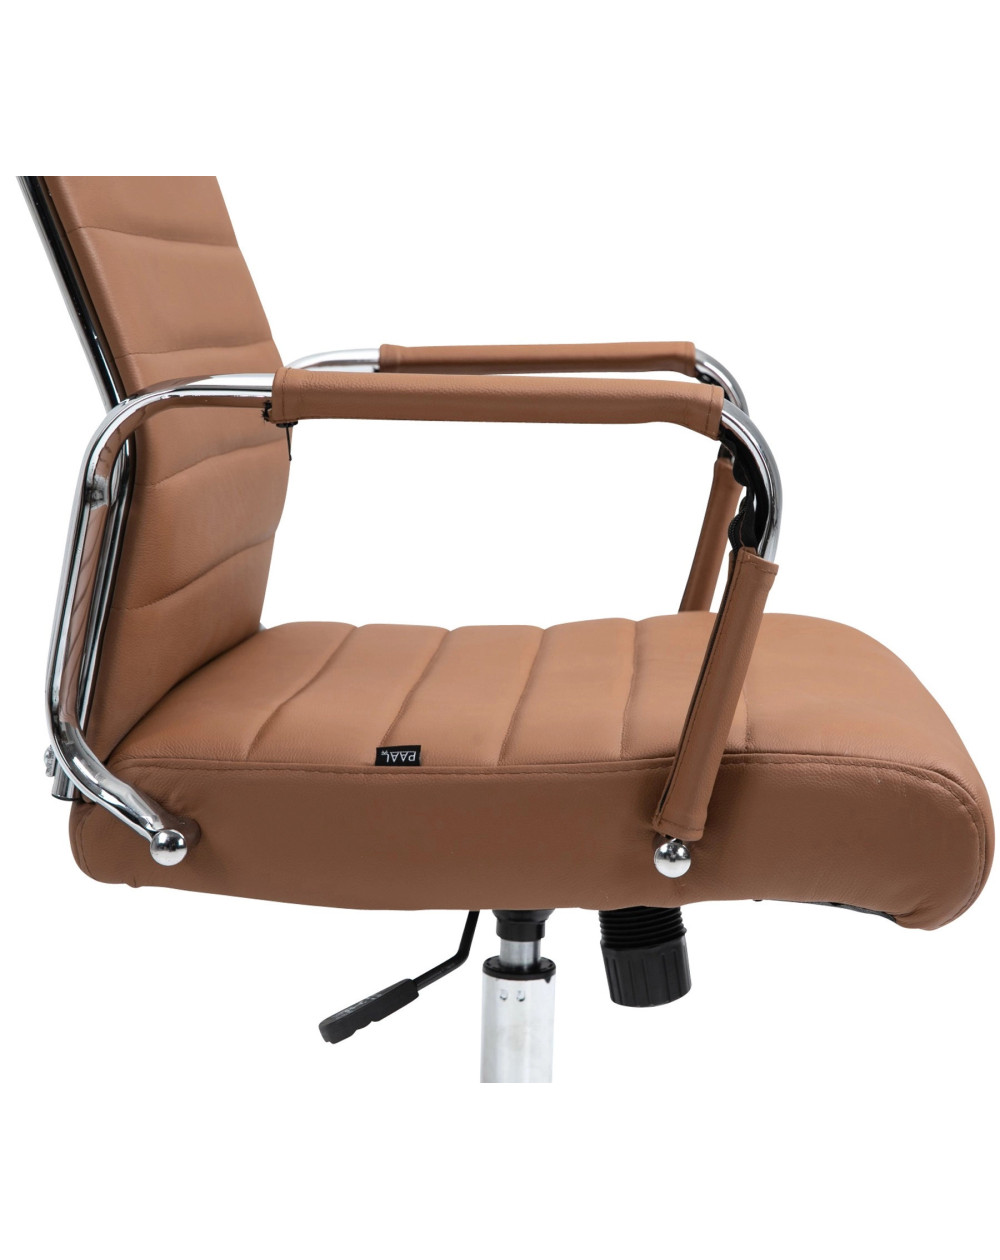 Demo Chair DUDECO - Seat material: Synthetic leather
Seat padding: Foam
Structure material: Steel
Max. Total height / min .: 120